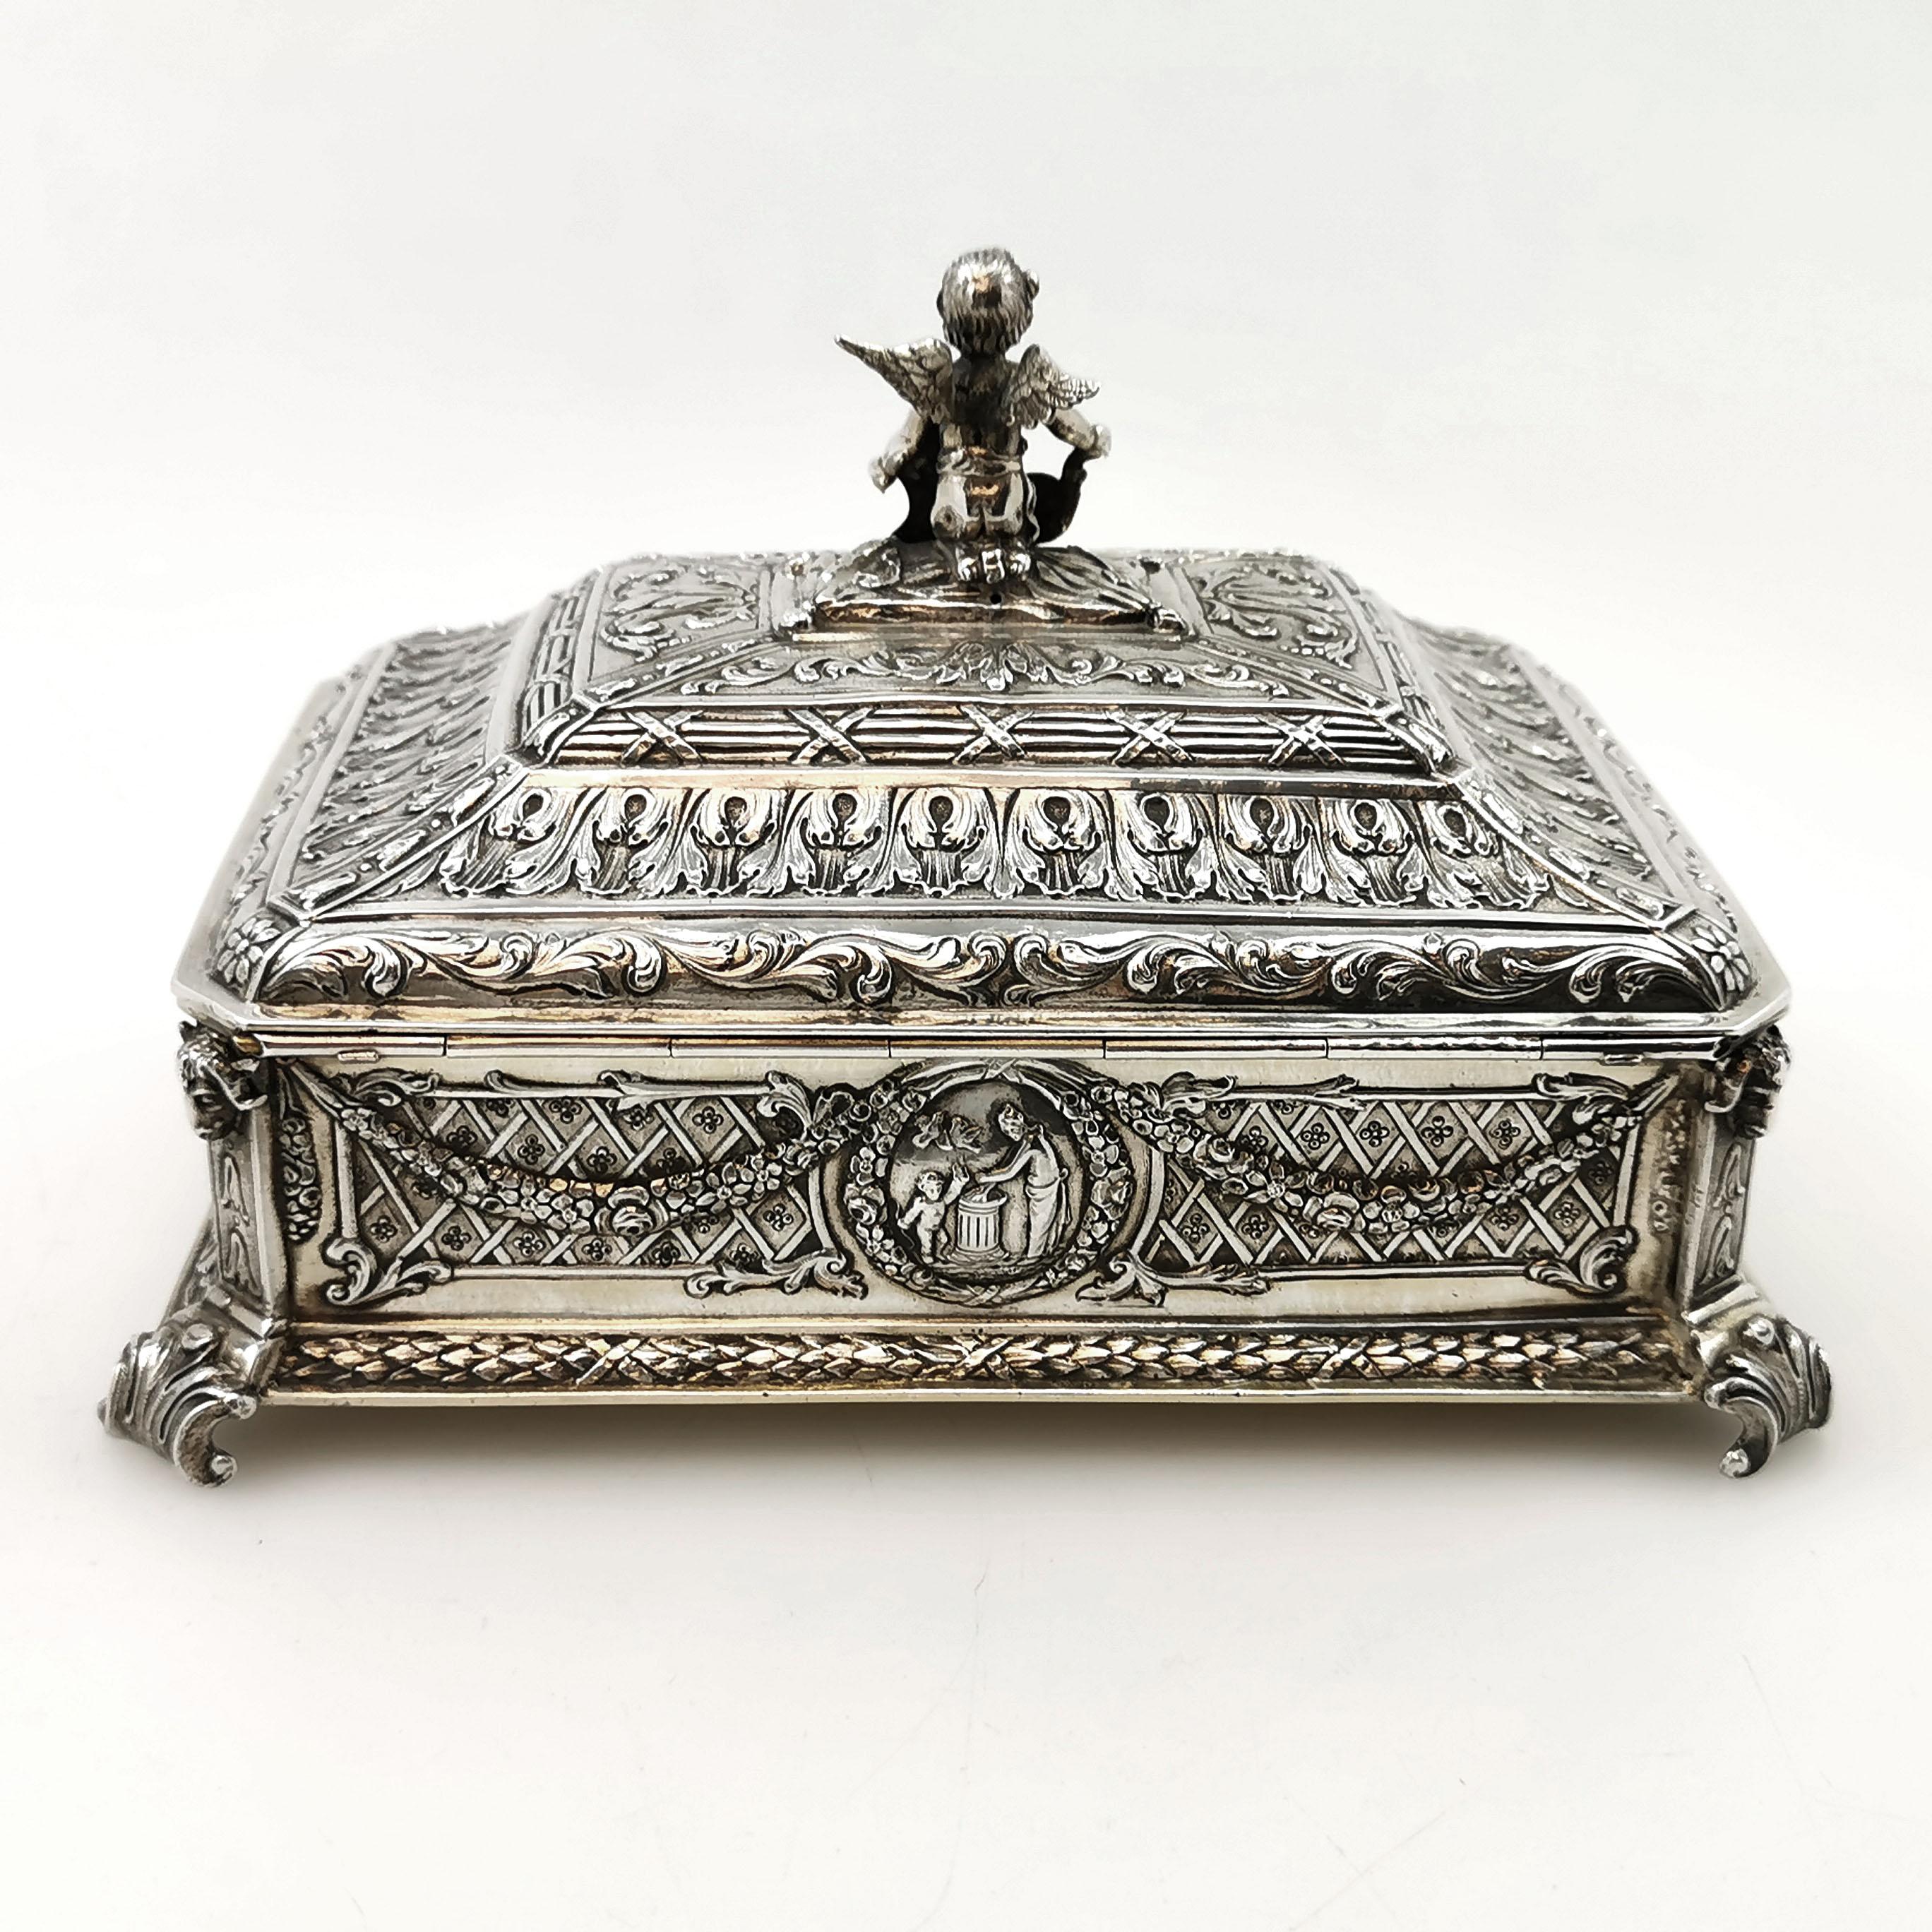 German Antique Sterling Silver Box 1905 English Import Marks Jewellery Jewelry Trinket